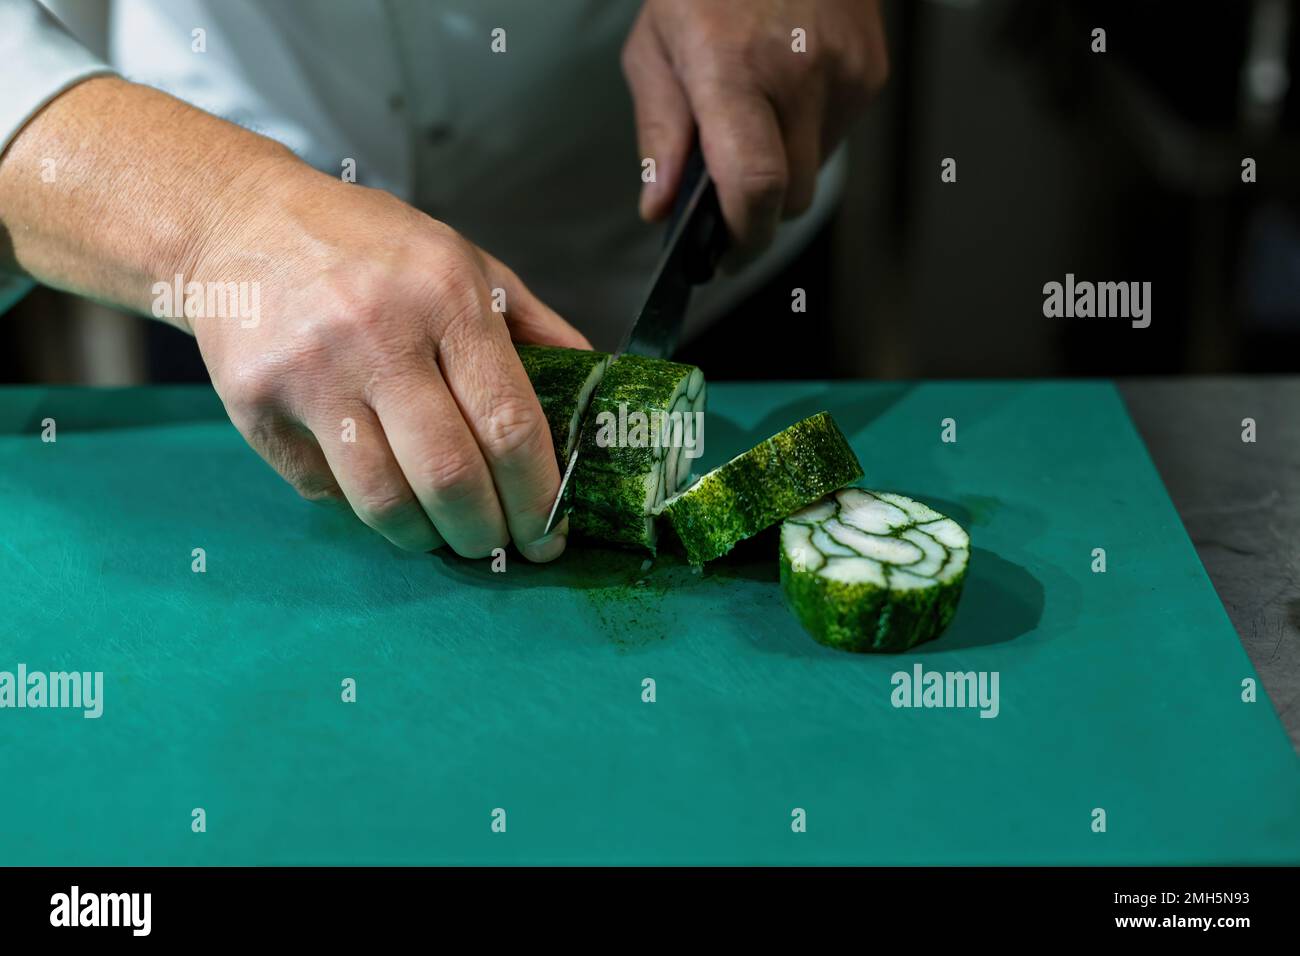 Chopping the fish wrapped in a roll with cling film Stock Photo